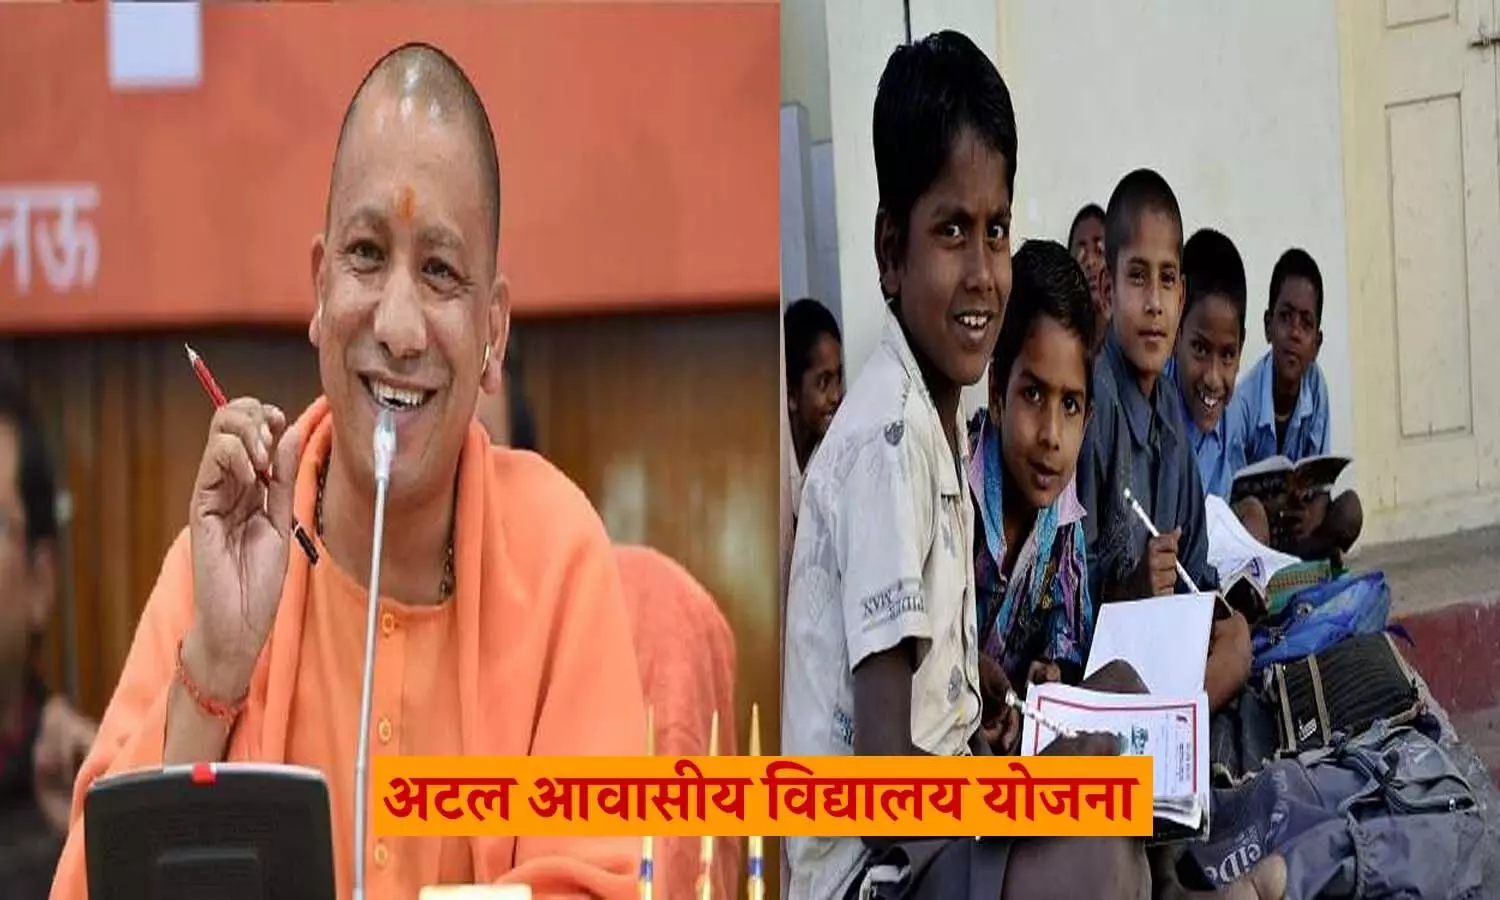 CM Yogis announcement: Children of workers will study in residential facility, every arrangement will be free